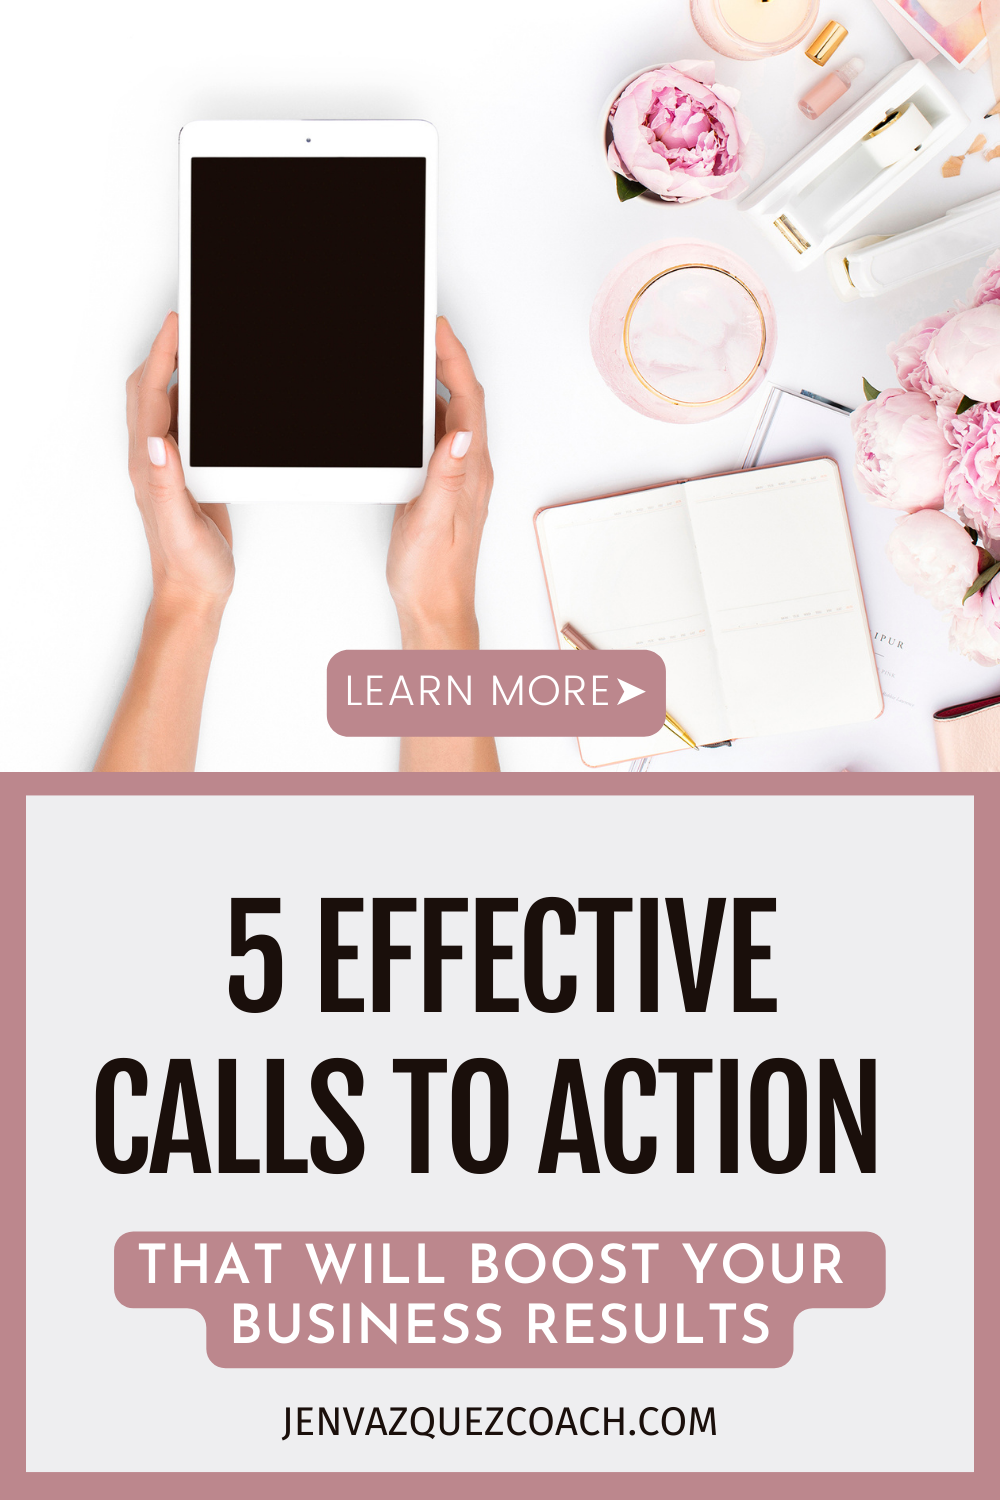 5 Effective Calls to Action That Will Boost Your Business Results by Jen Vazquez Media